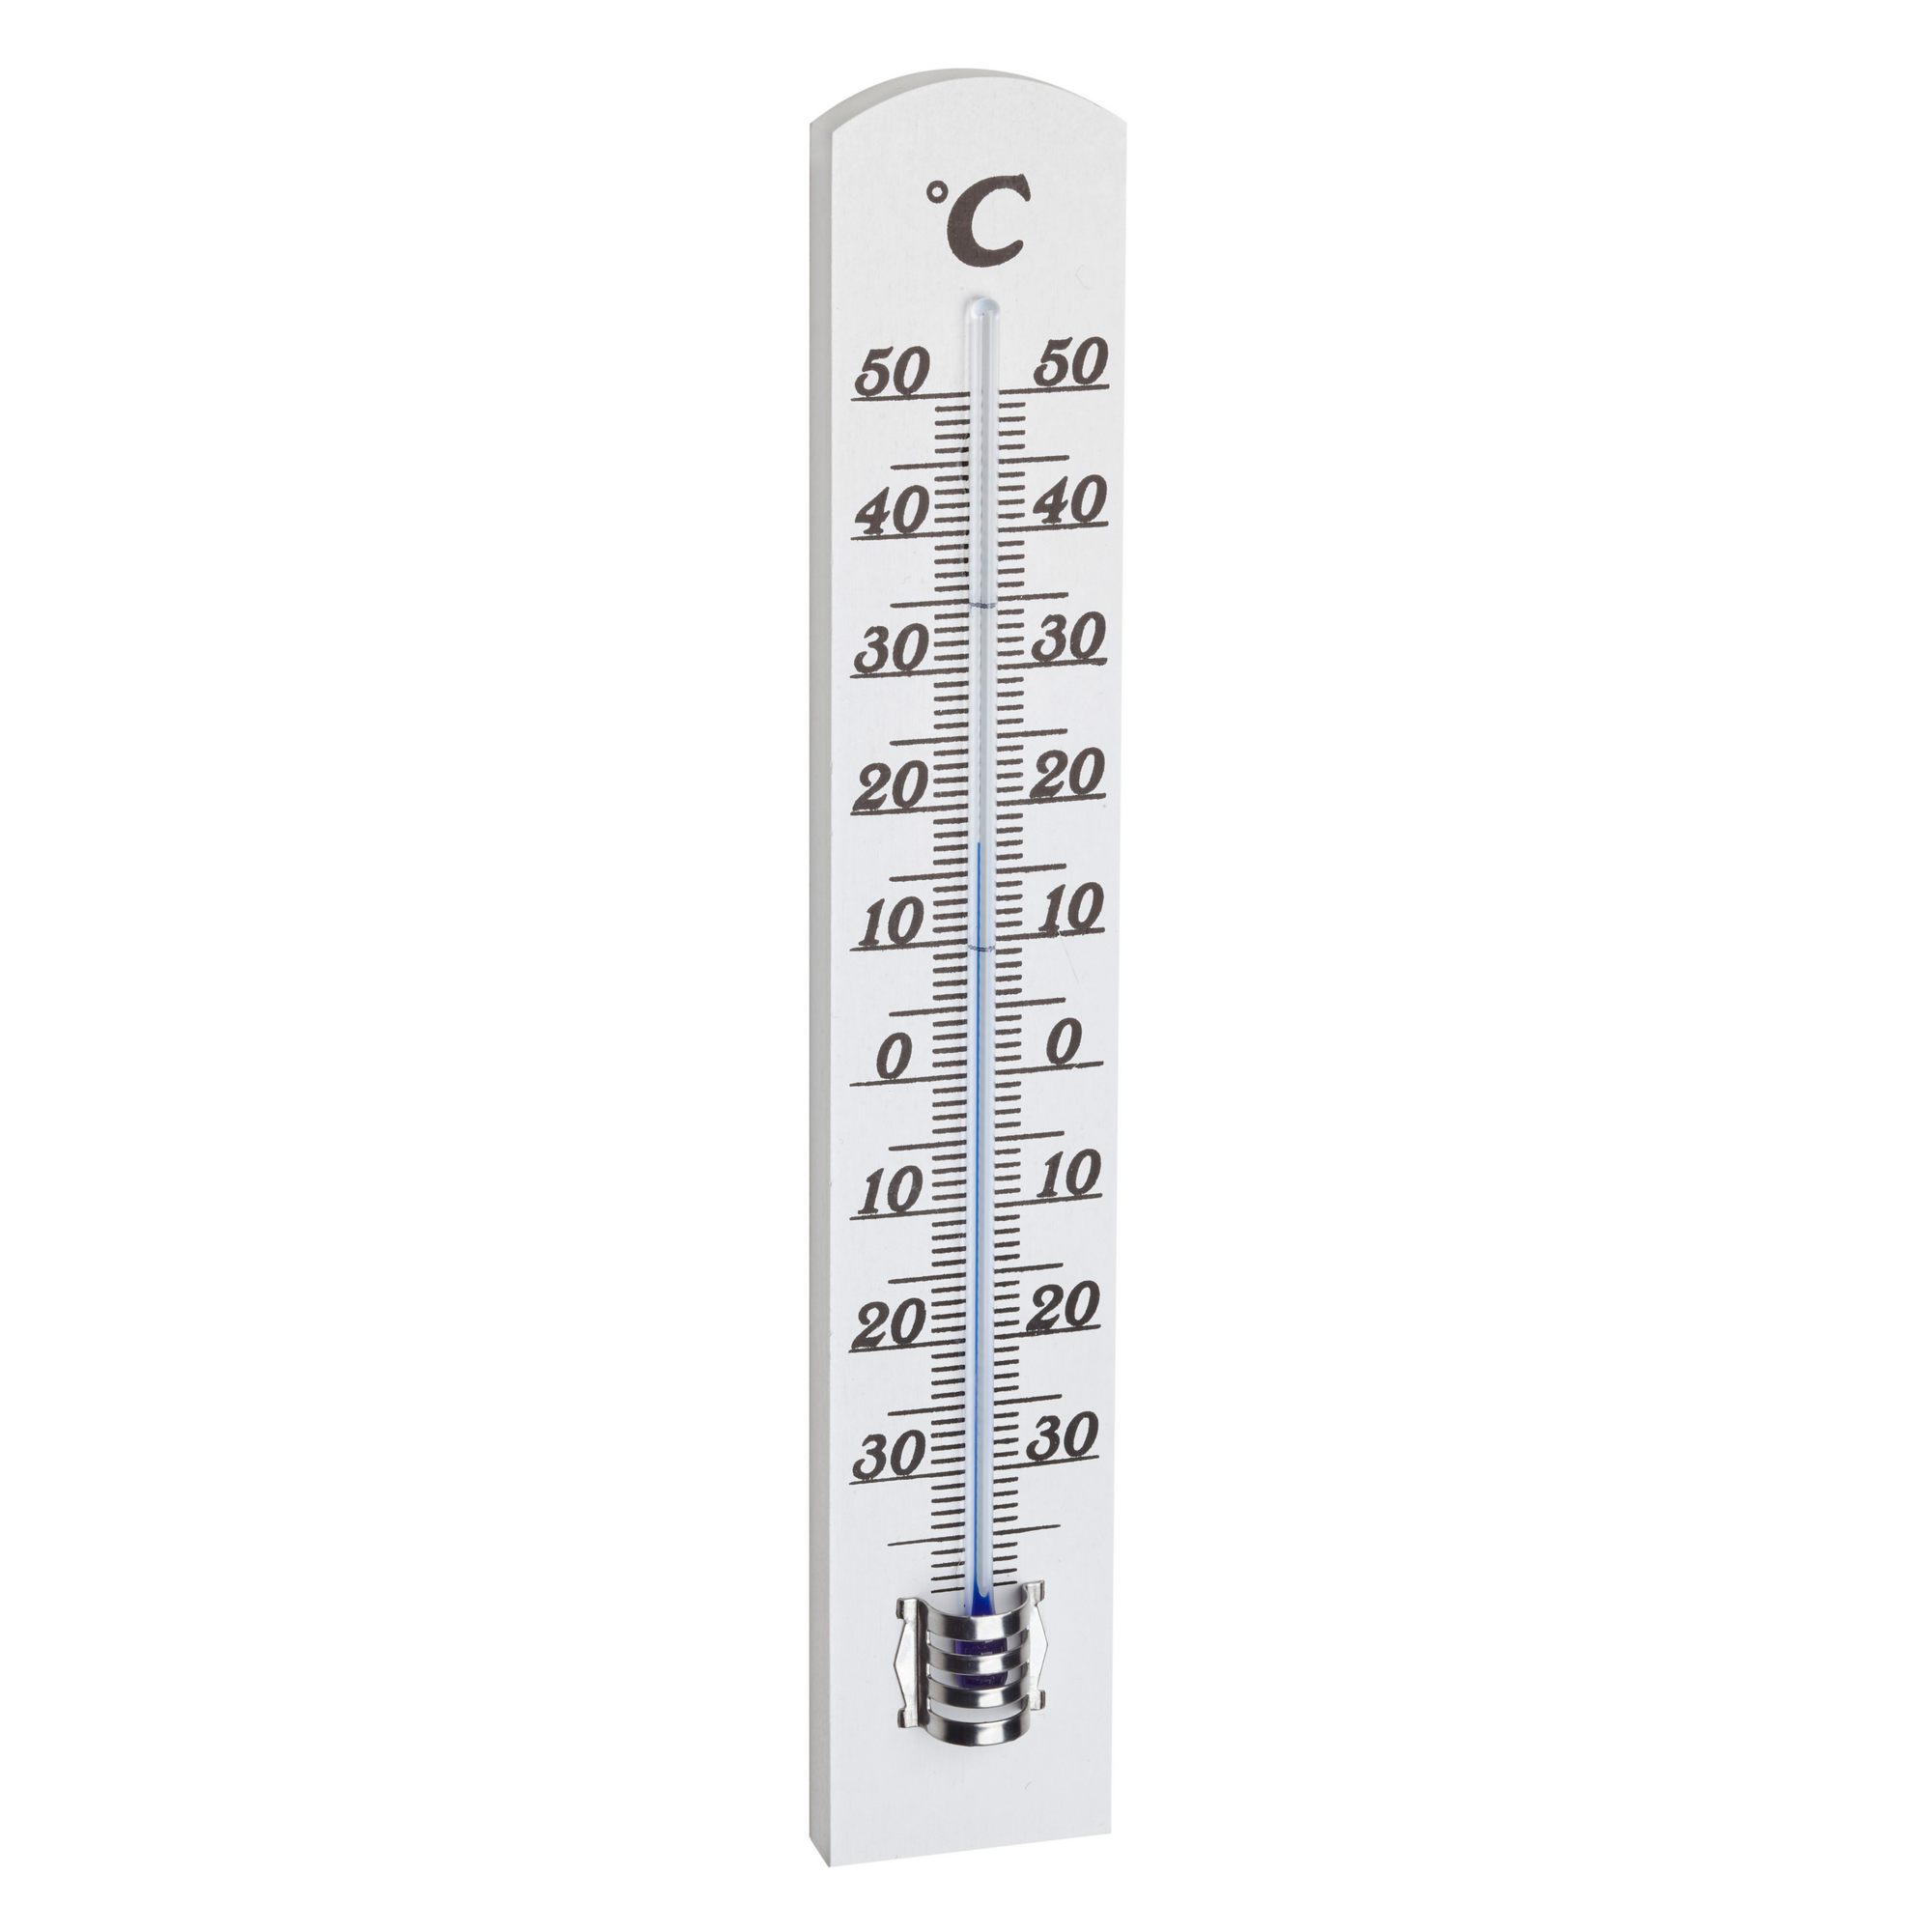 Innenthermometer Massivholz altweiß 3,1 x 1,6 x 18 cm + product picture